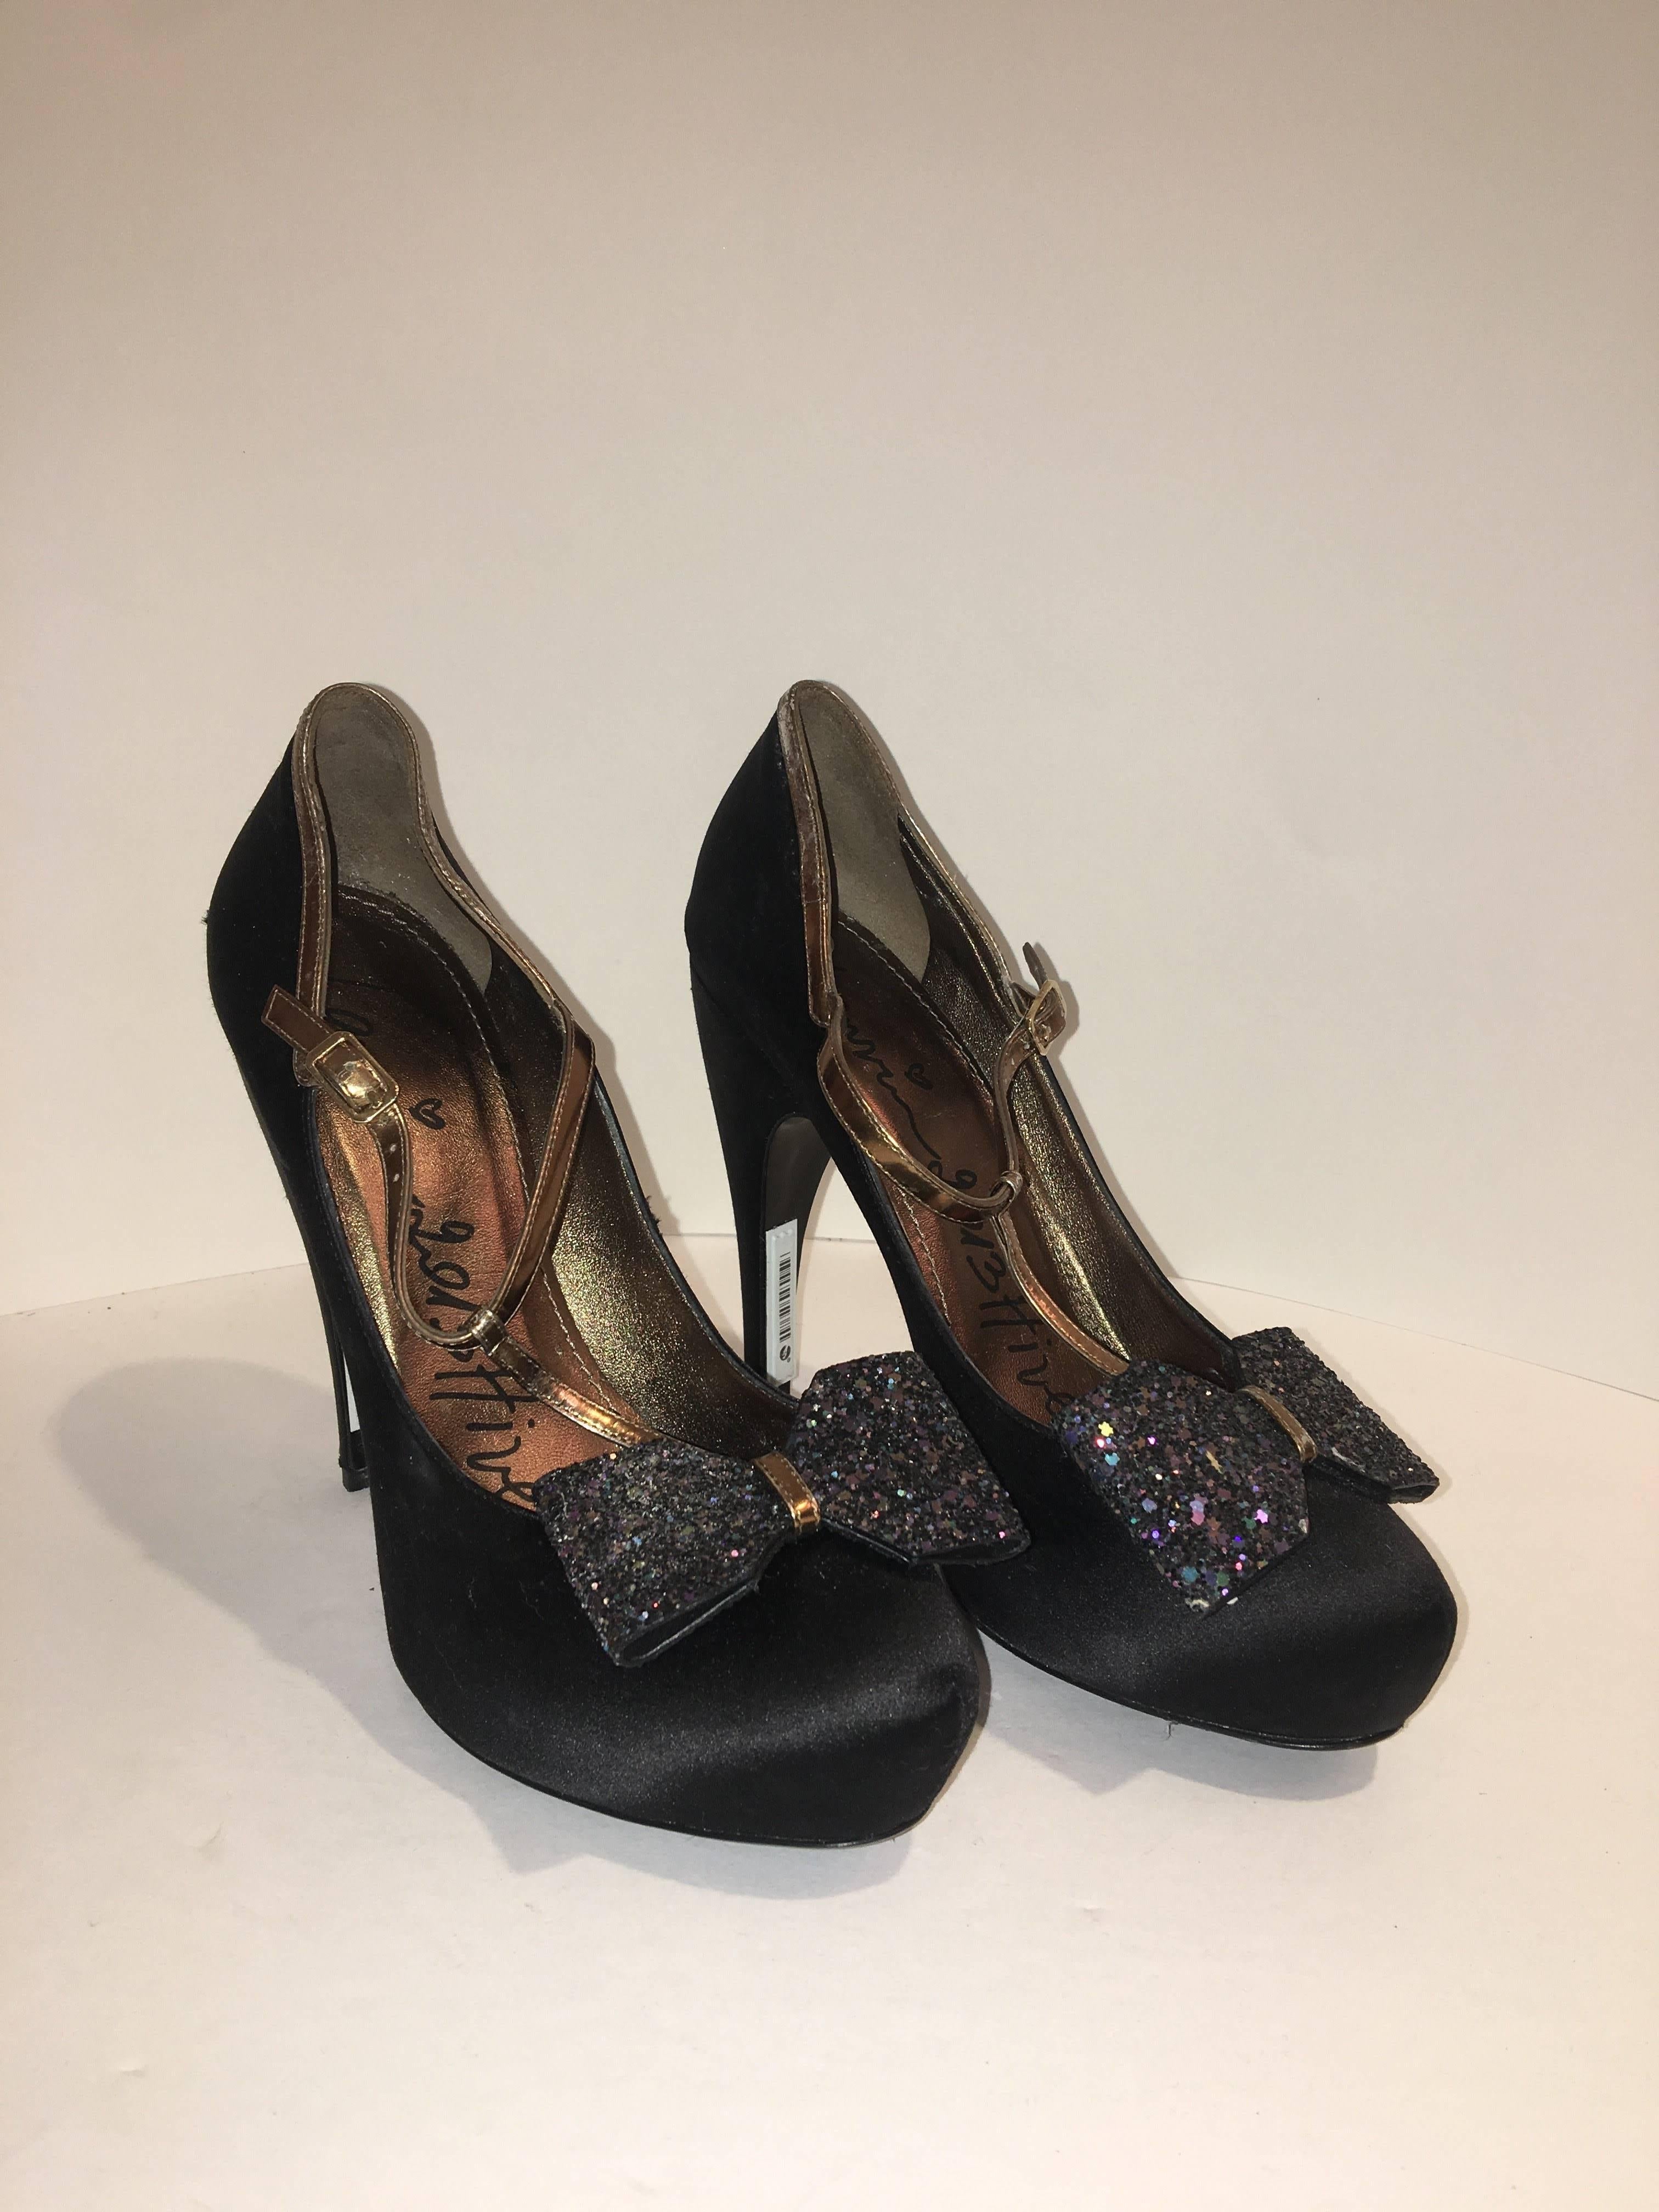 Lavin Satin Heels with a T-Strap. Size 38.5 with a Glitter Sequined bow at the Toe. 